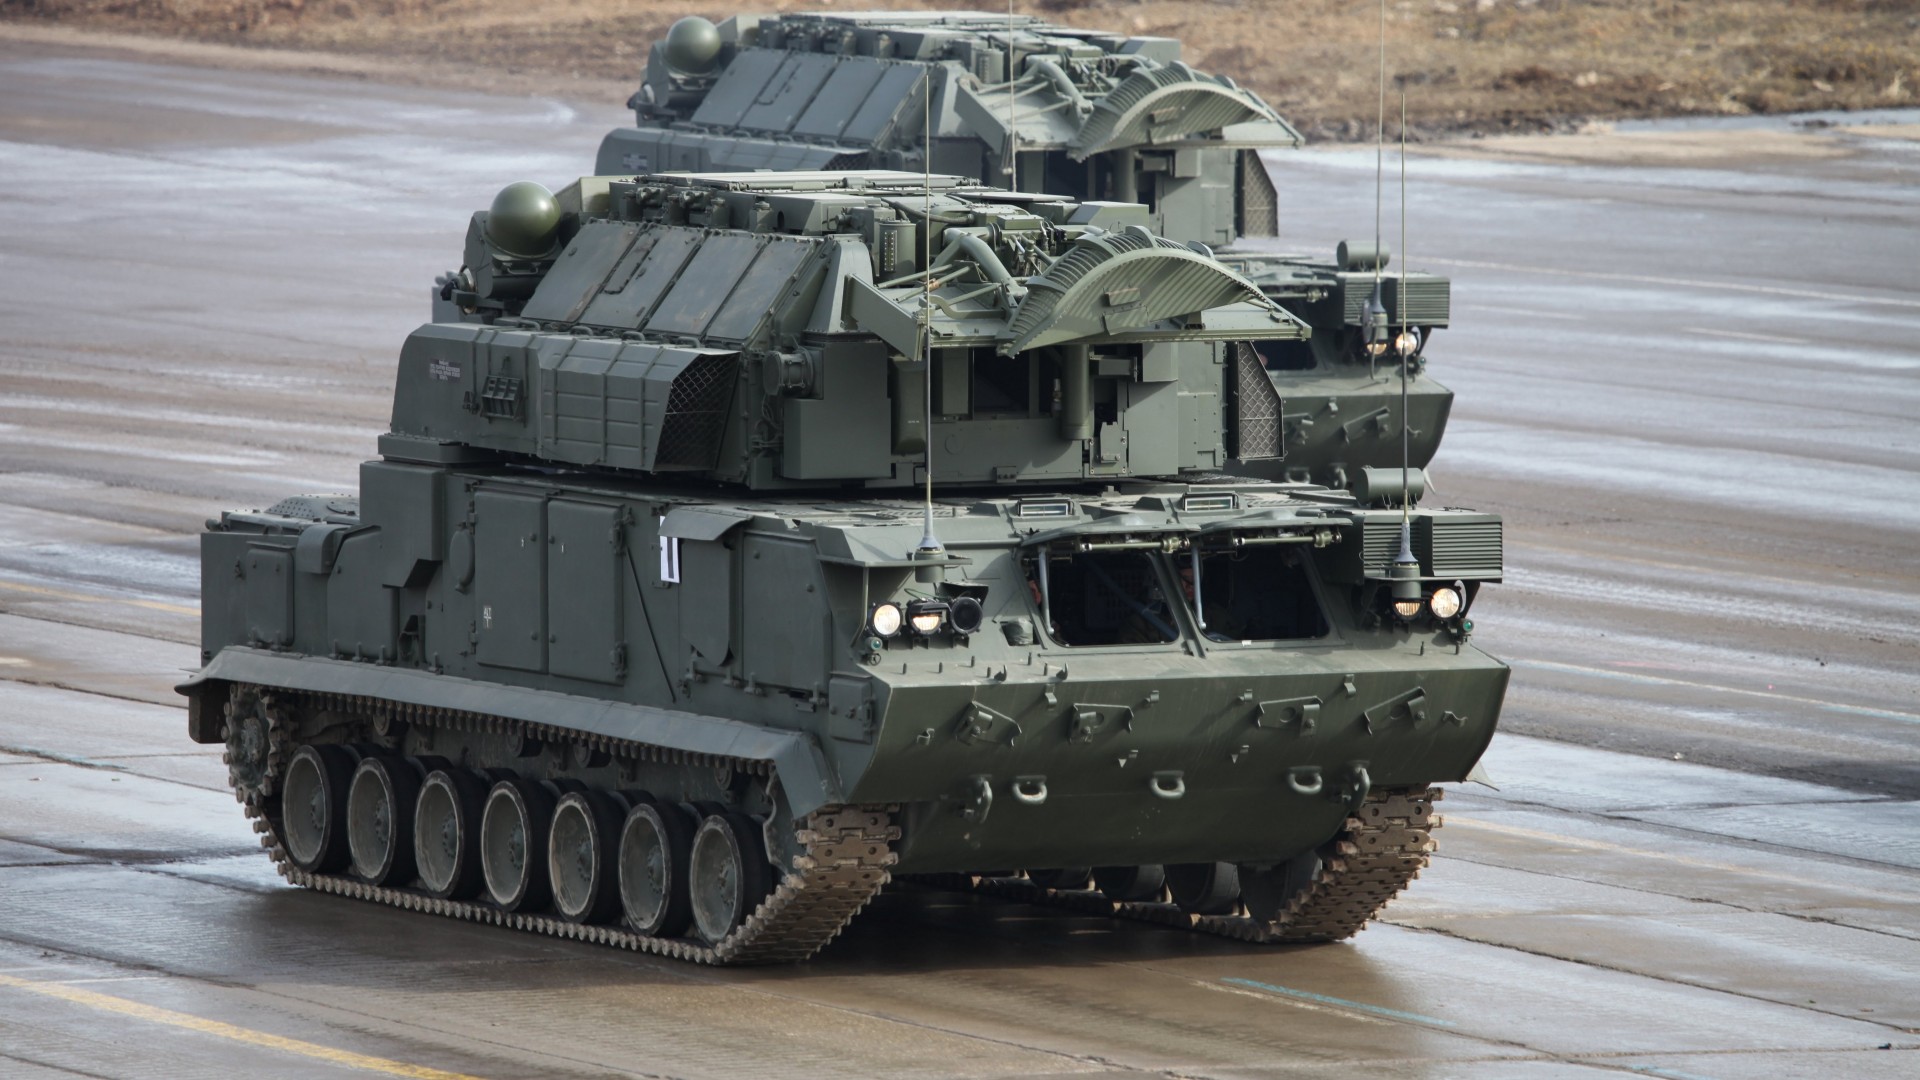 SA-15 Gauntlet, Tor, missile system, 9K330, Russian Army (horizontal)